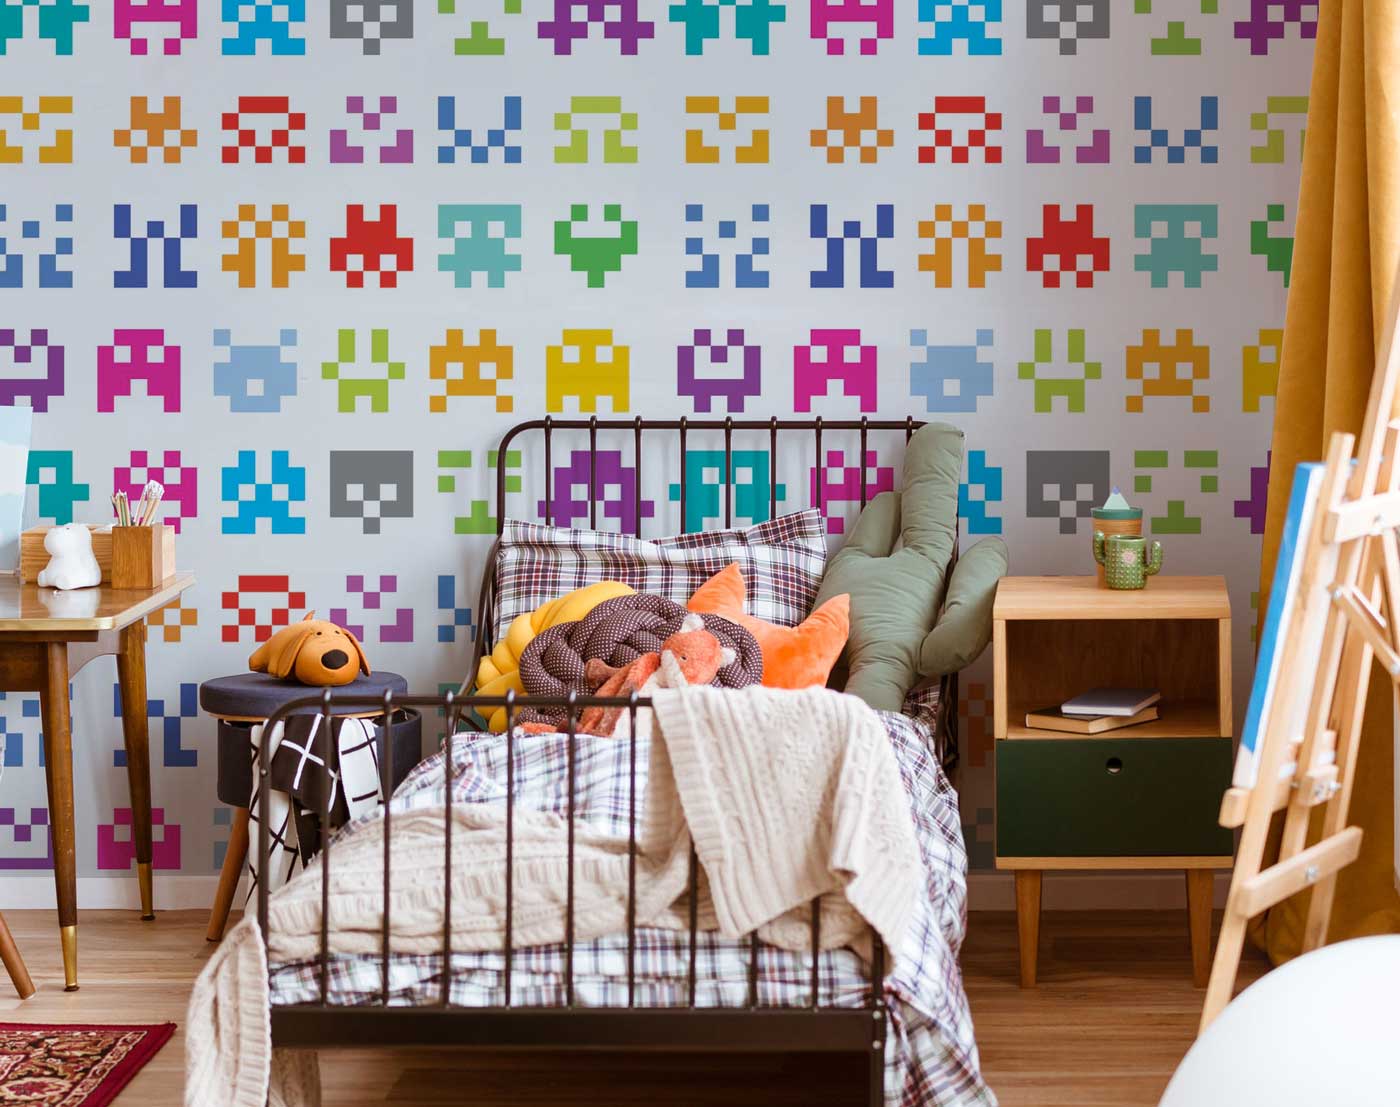 Pixel game icons Wall Mural-Wall Mural-Eazywallz